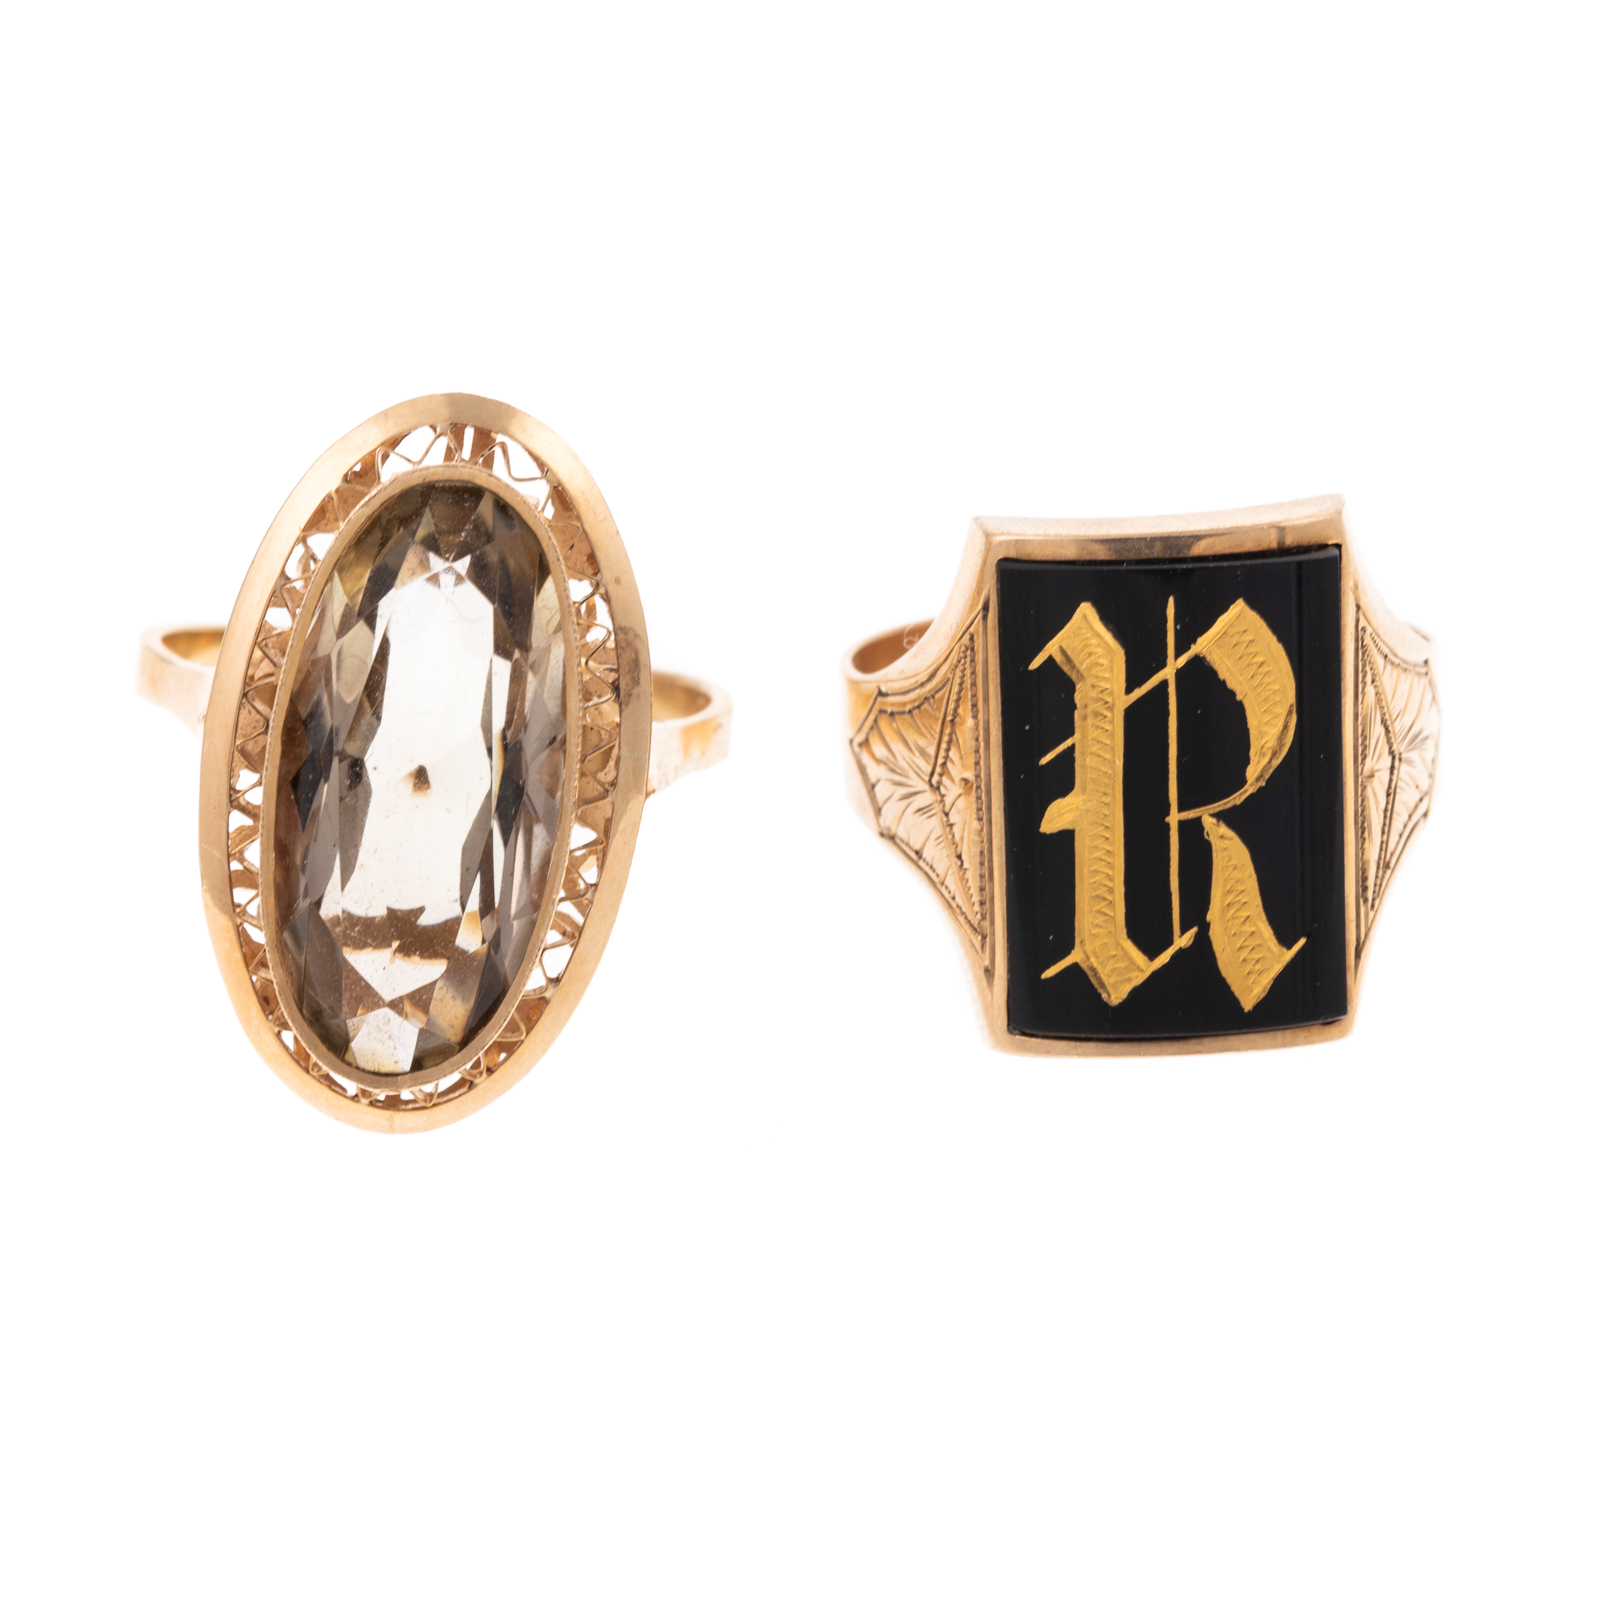 TWO STATEMENT RINGS IN 14K & 18K